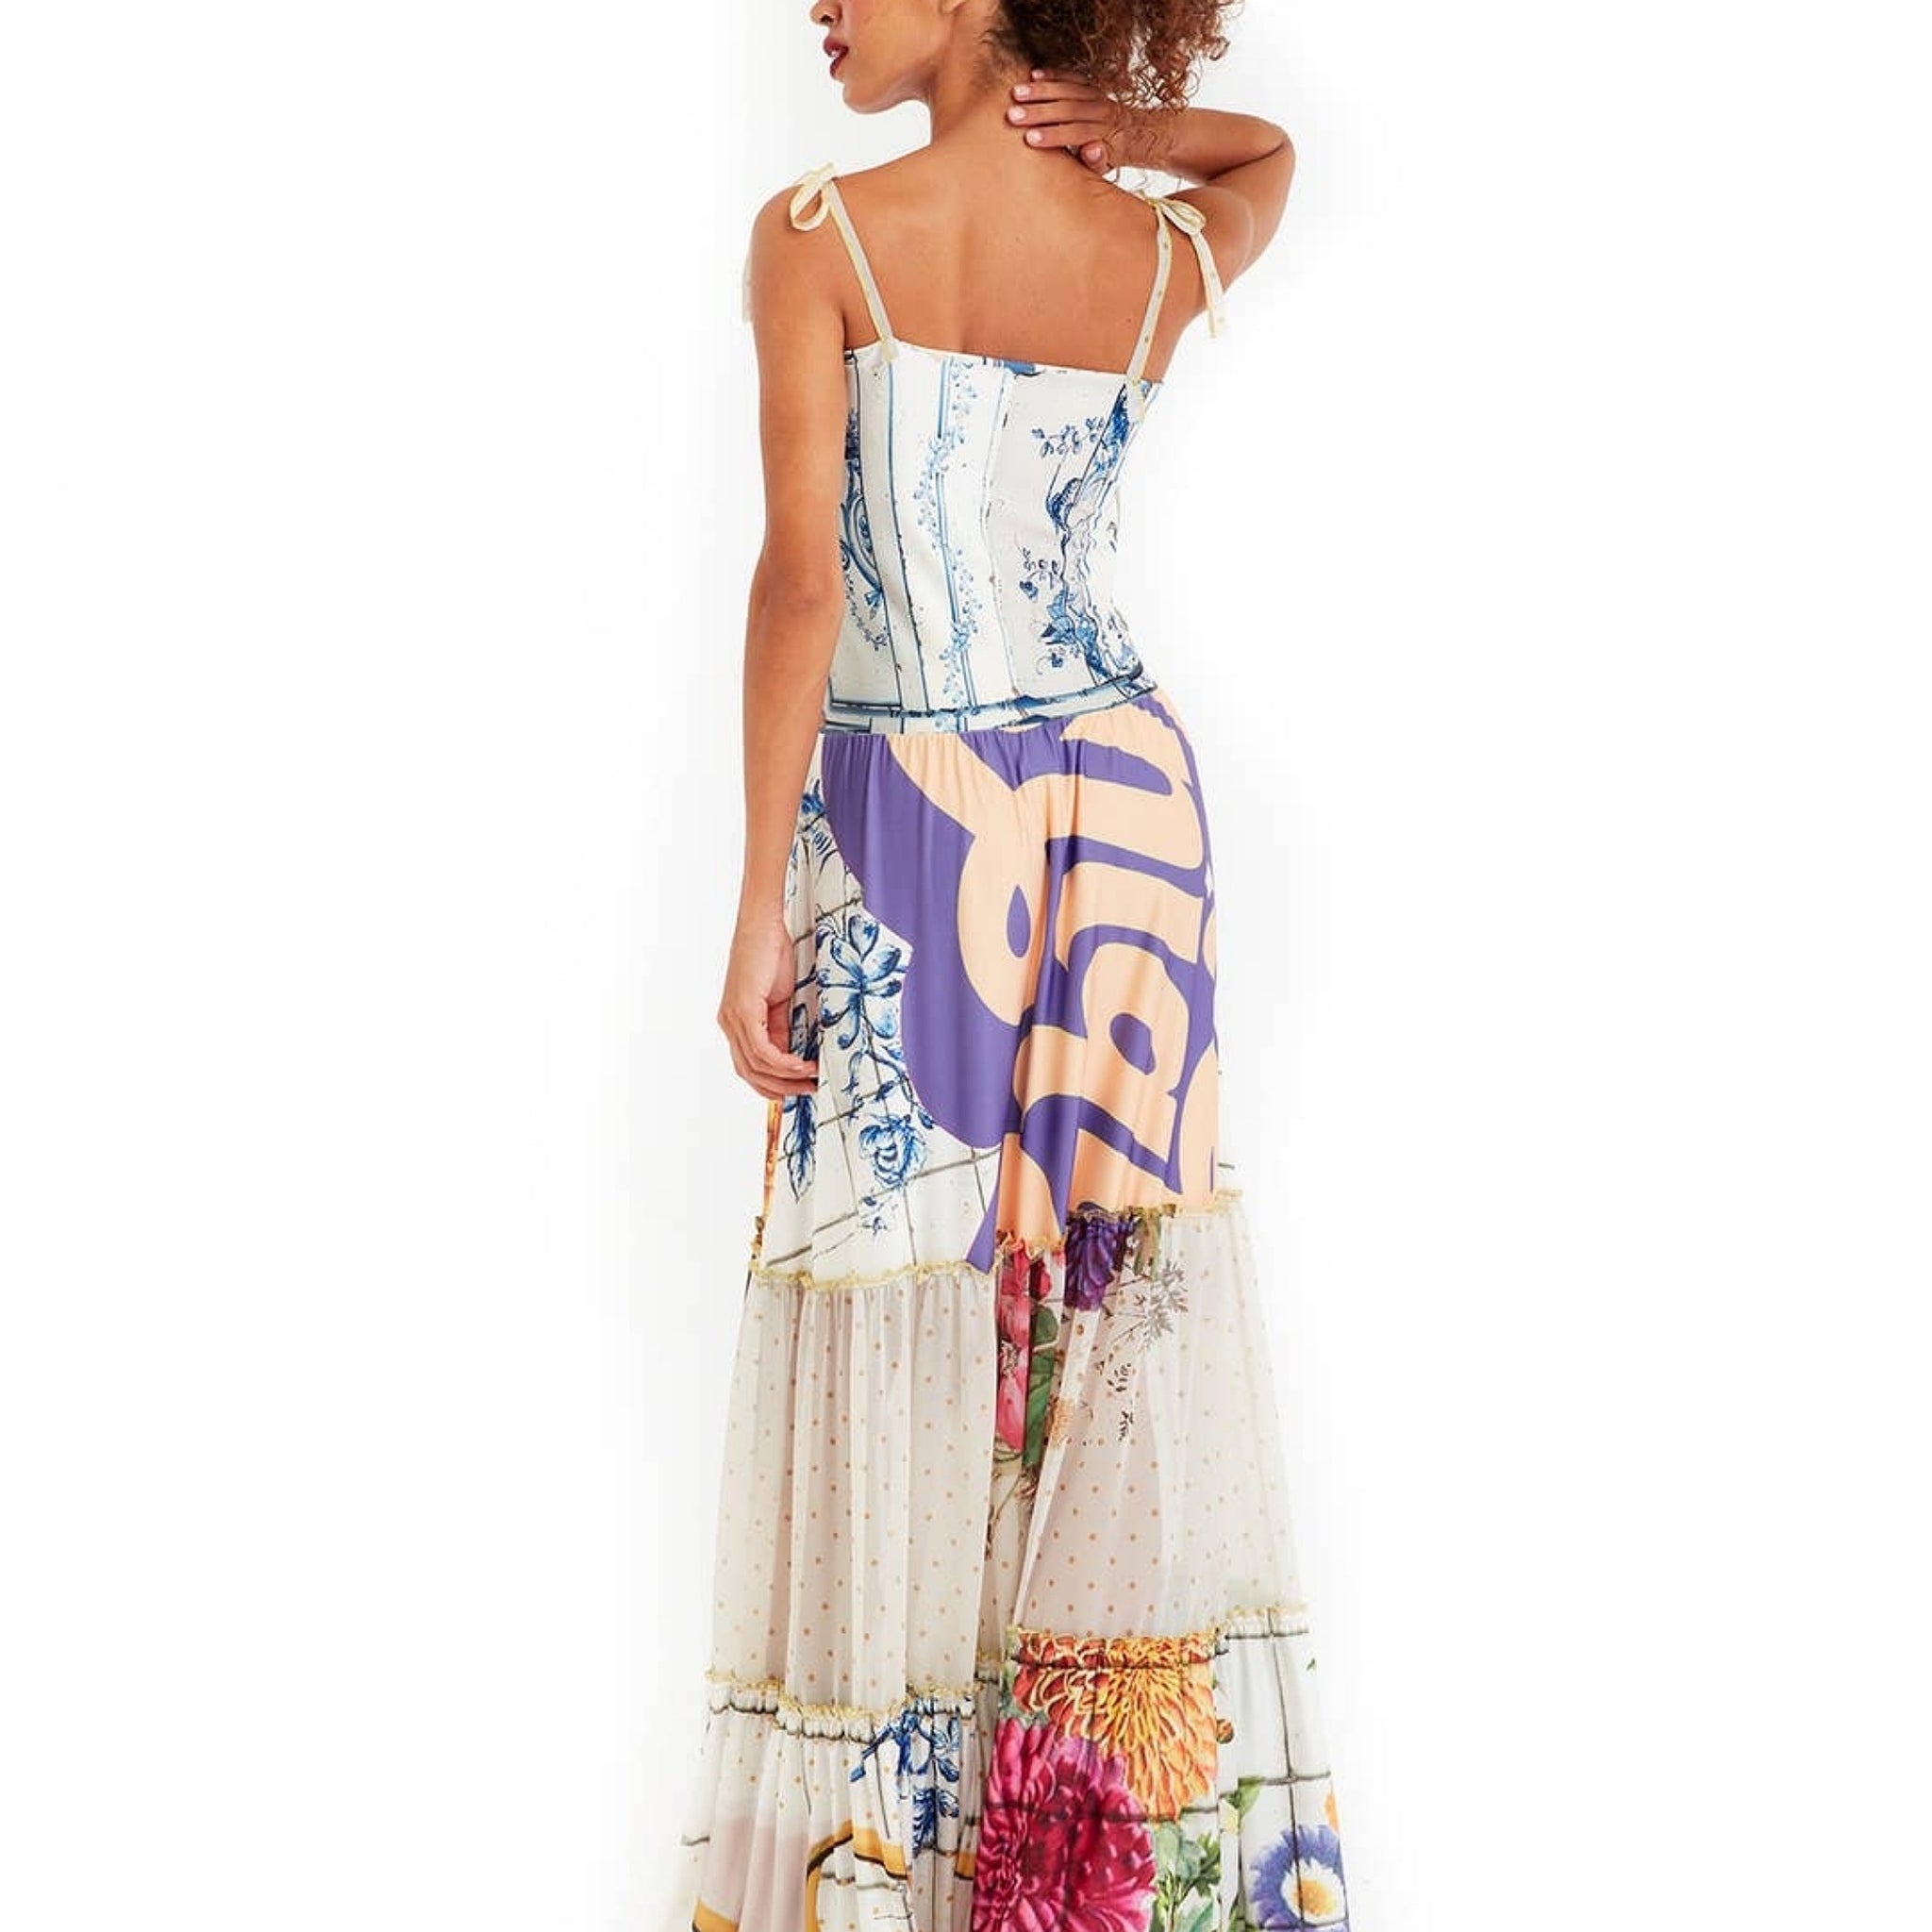 The Art of Fashion Unique Dress or Maxi Skirt (7588583538862)